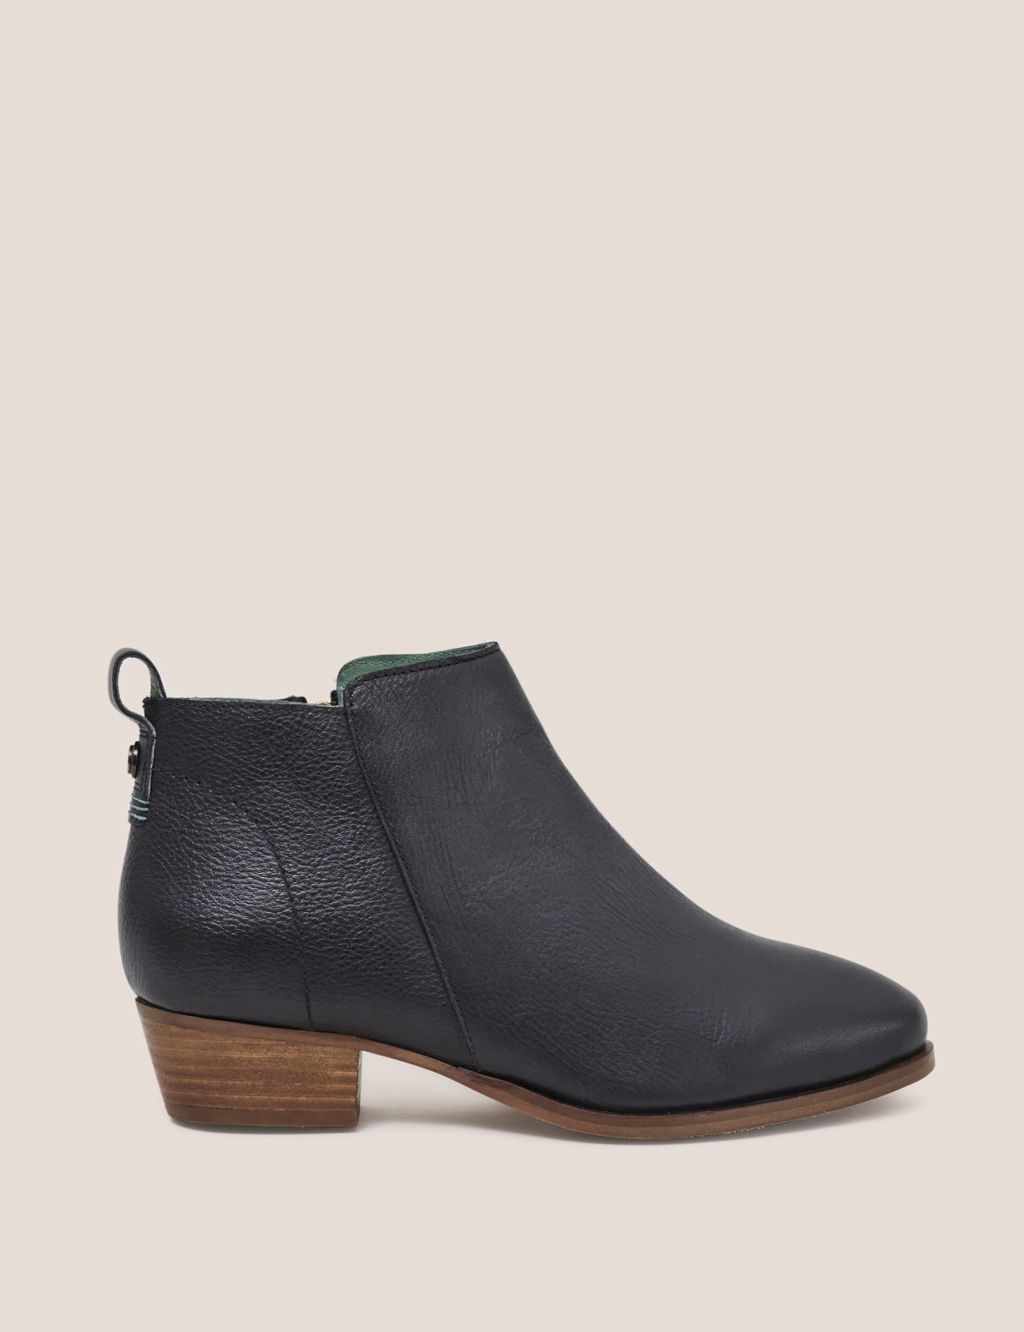 Leather Block Heel Ankle Boots | White Stuff | M&S